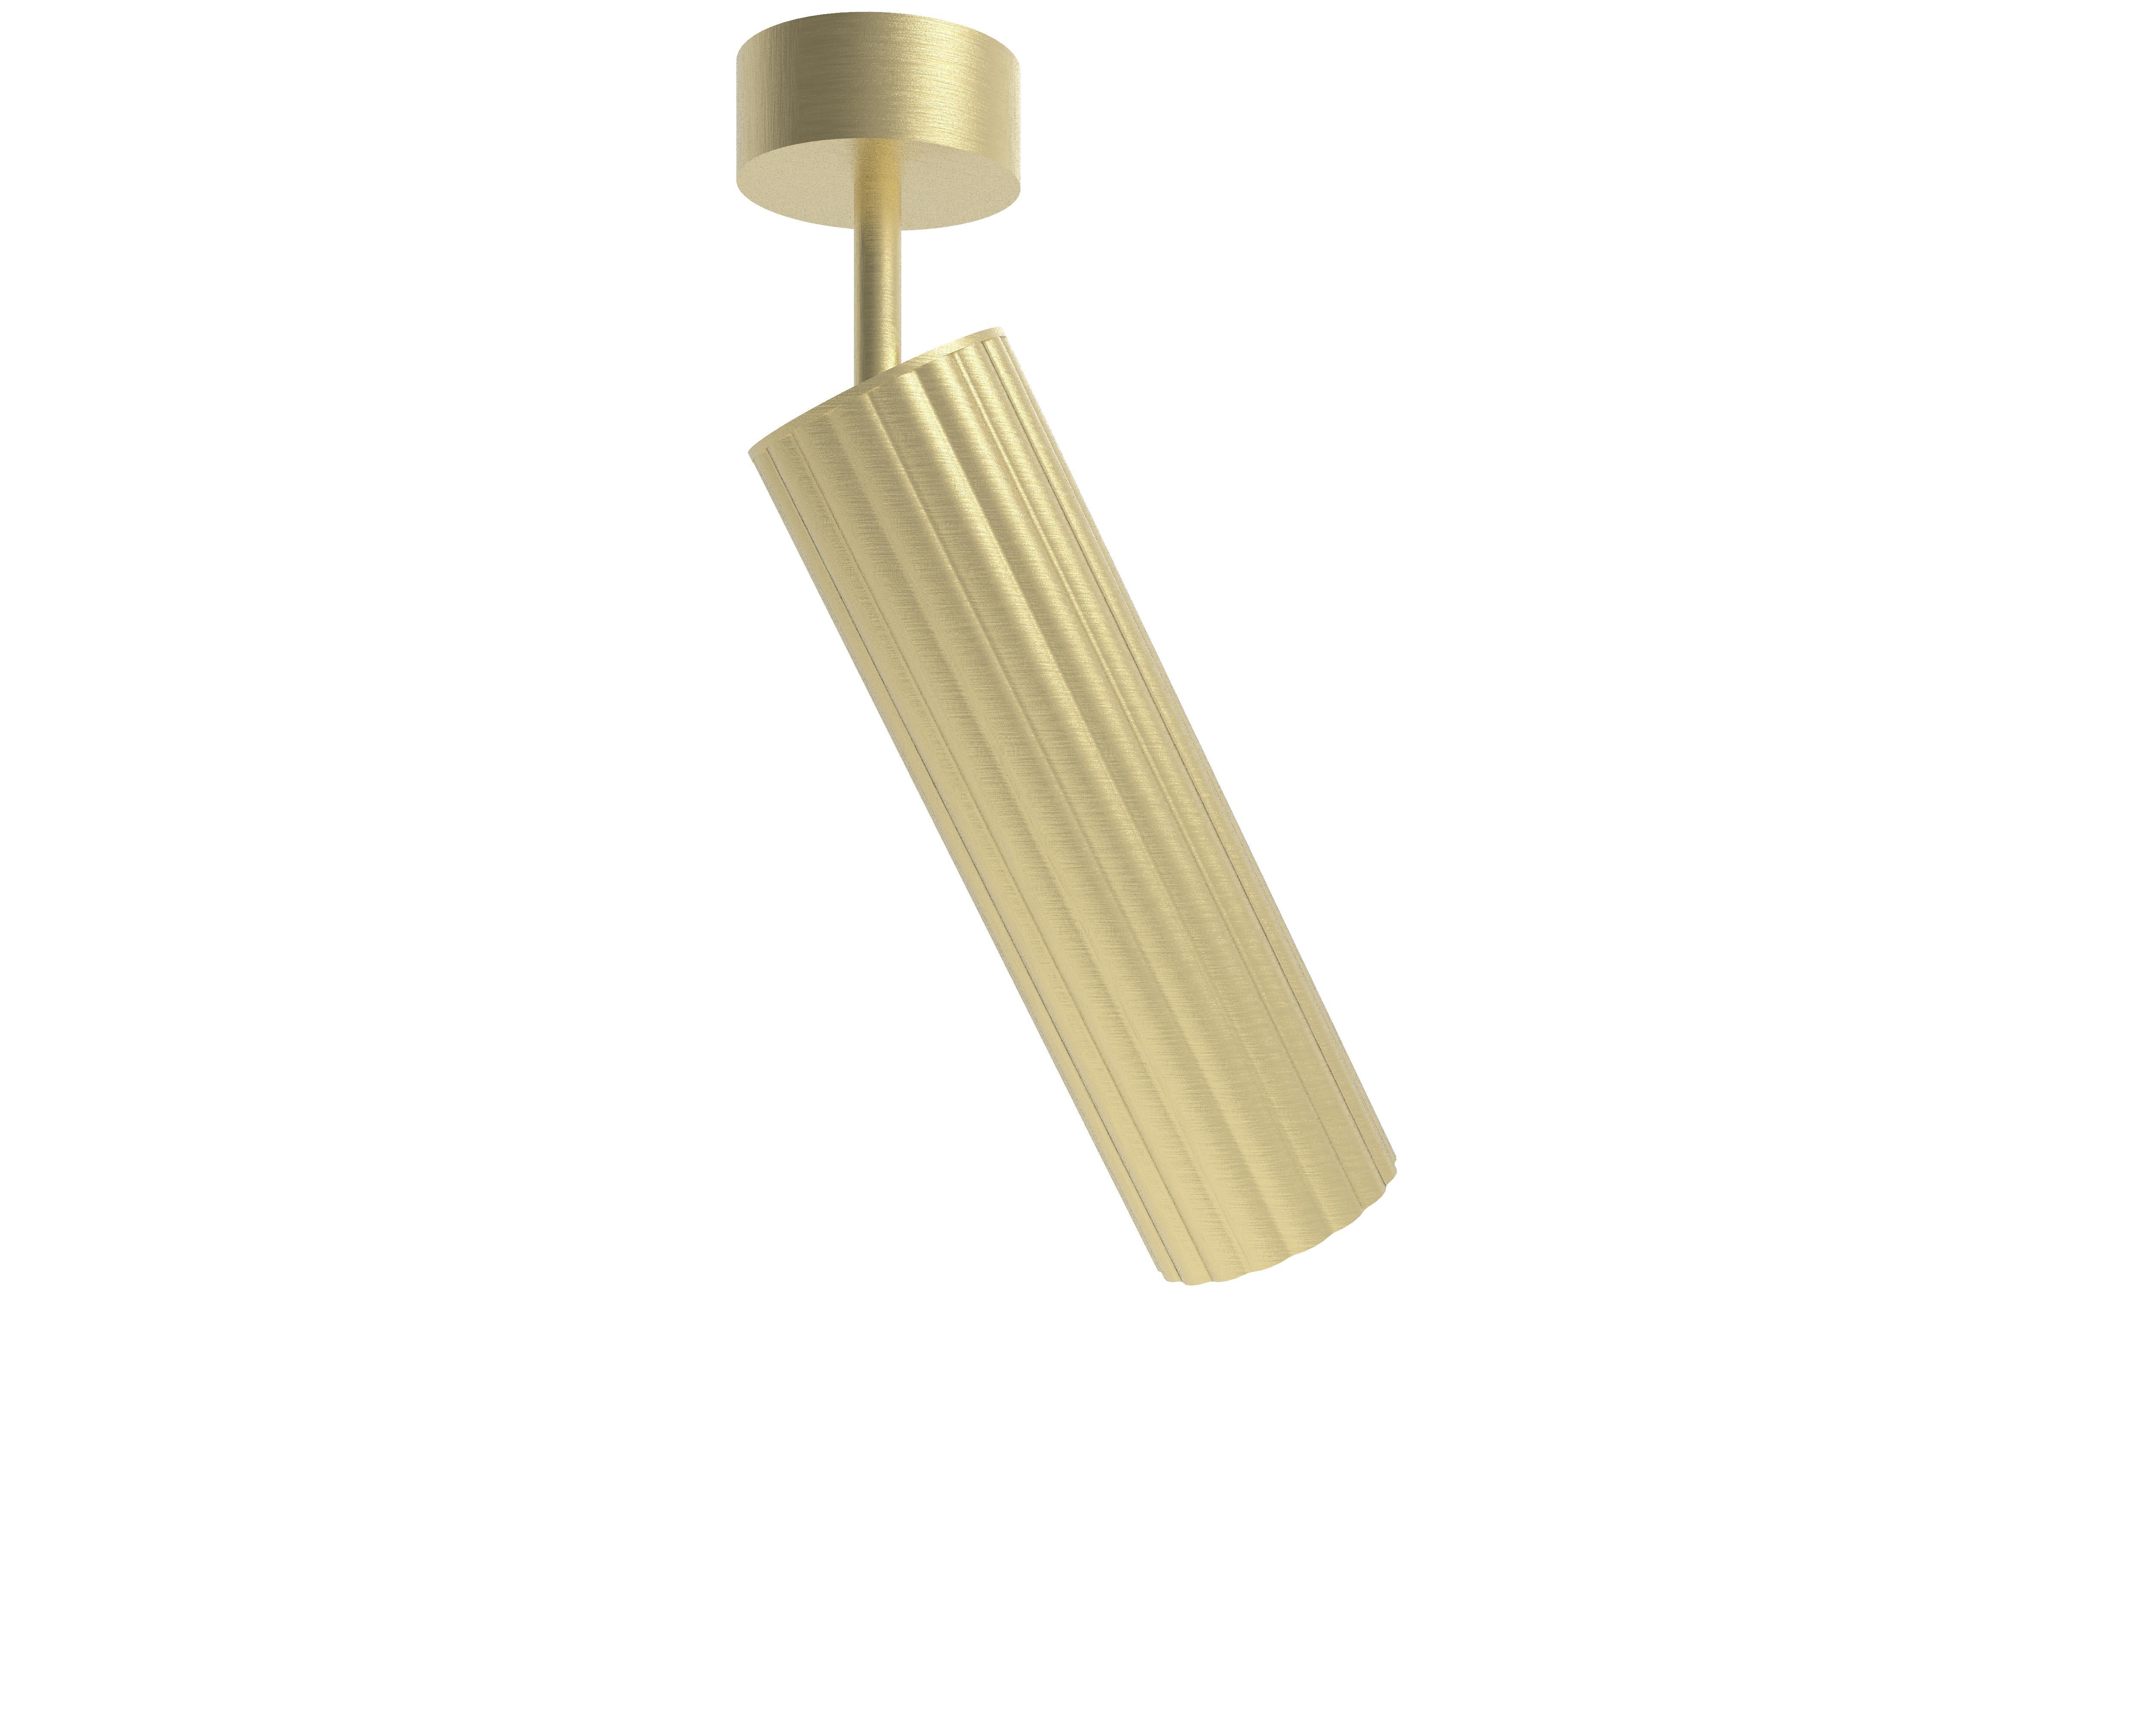 Lustrin ceiling lamp by Luce Tu
Dimensions: 200 mm x 60 mm
Materials: Brass

State-of-the-art technology and craftsmanship come together in this suspension with an almost timeless charm. Like a precious jewel, the Sbarlusc collection is perfect